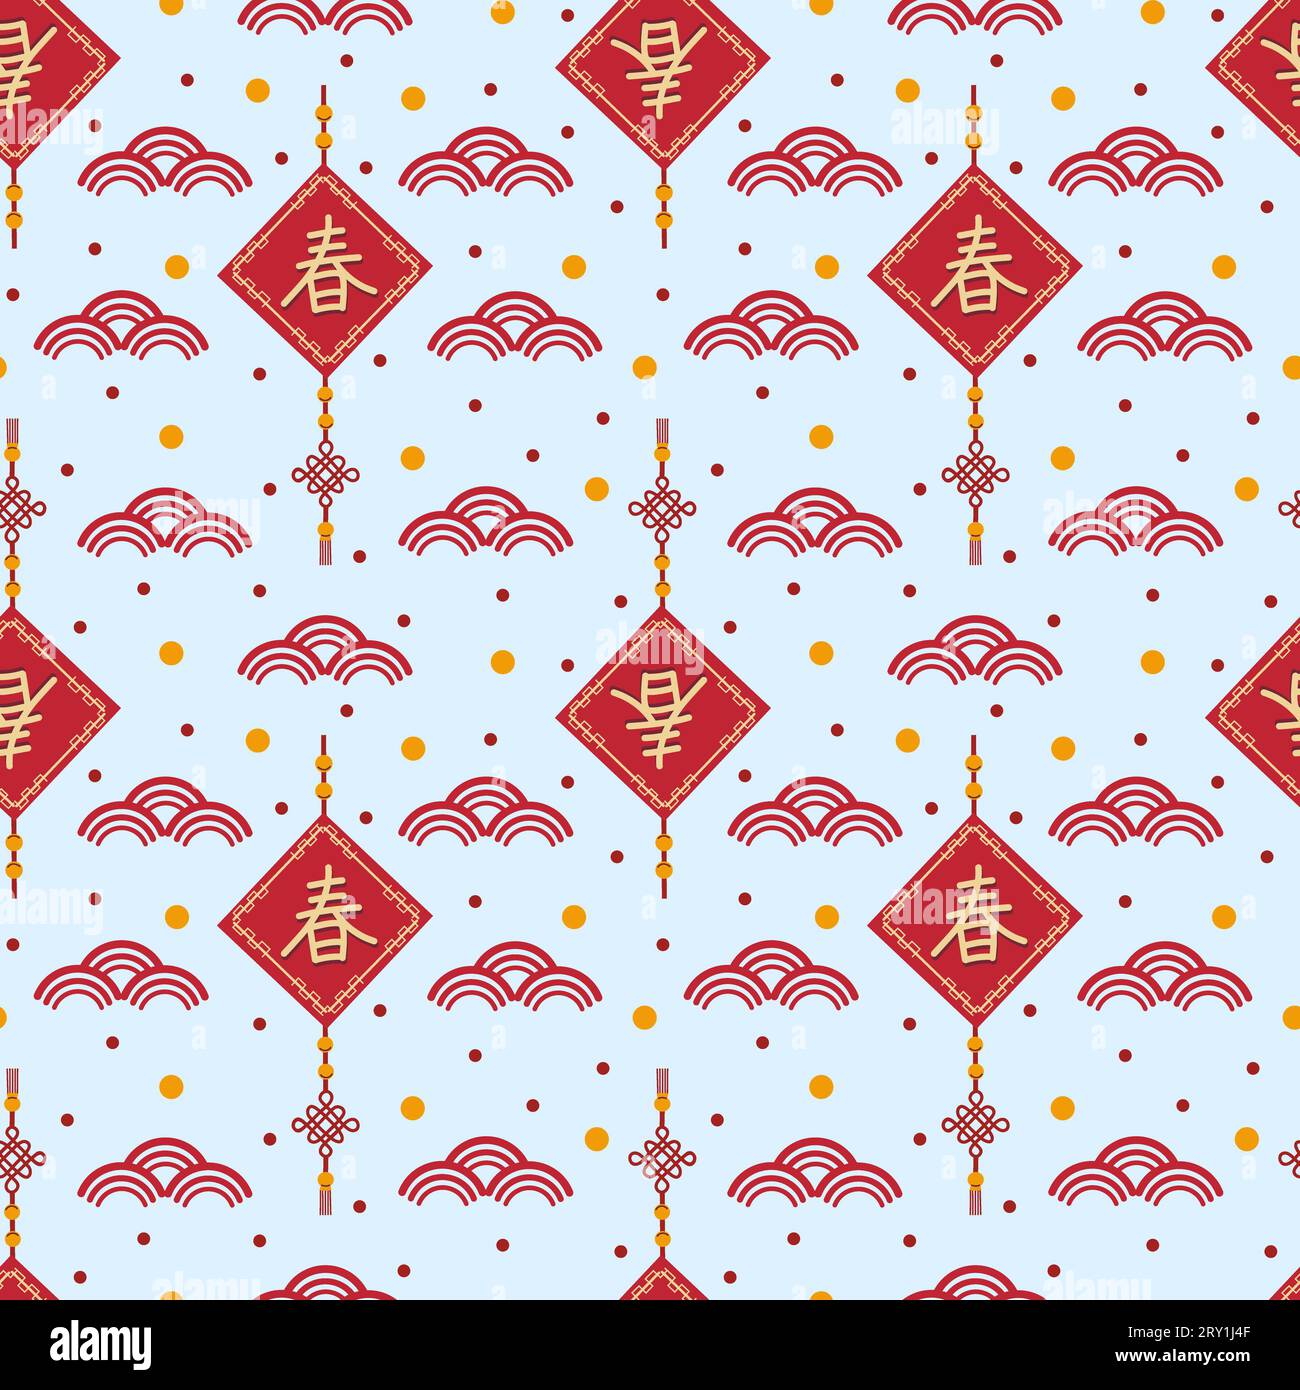 Chinese New Year Spring Lucky Charm Seamless Pattern Design with Chinese Character 'Chun' meaning 'Spring' Stock Photo